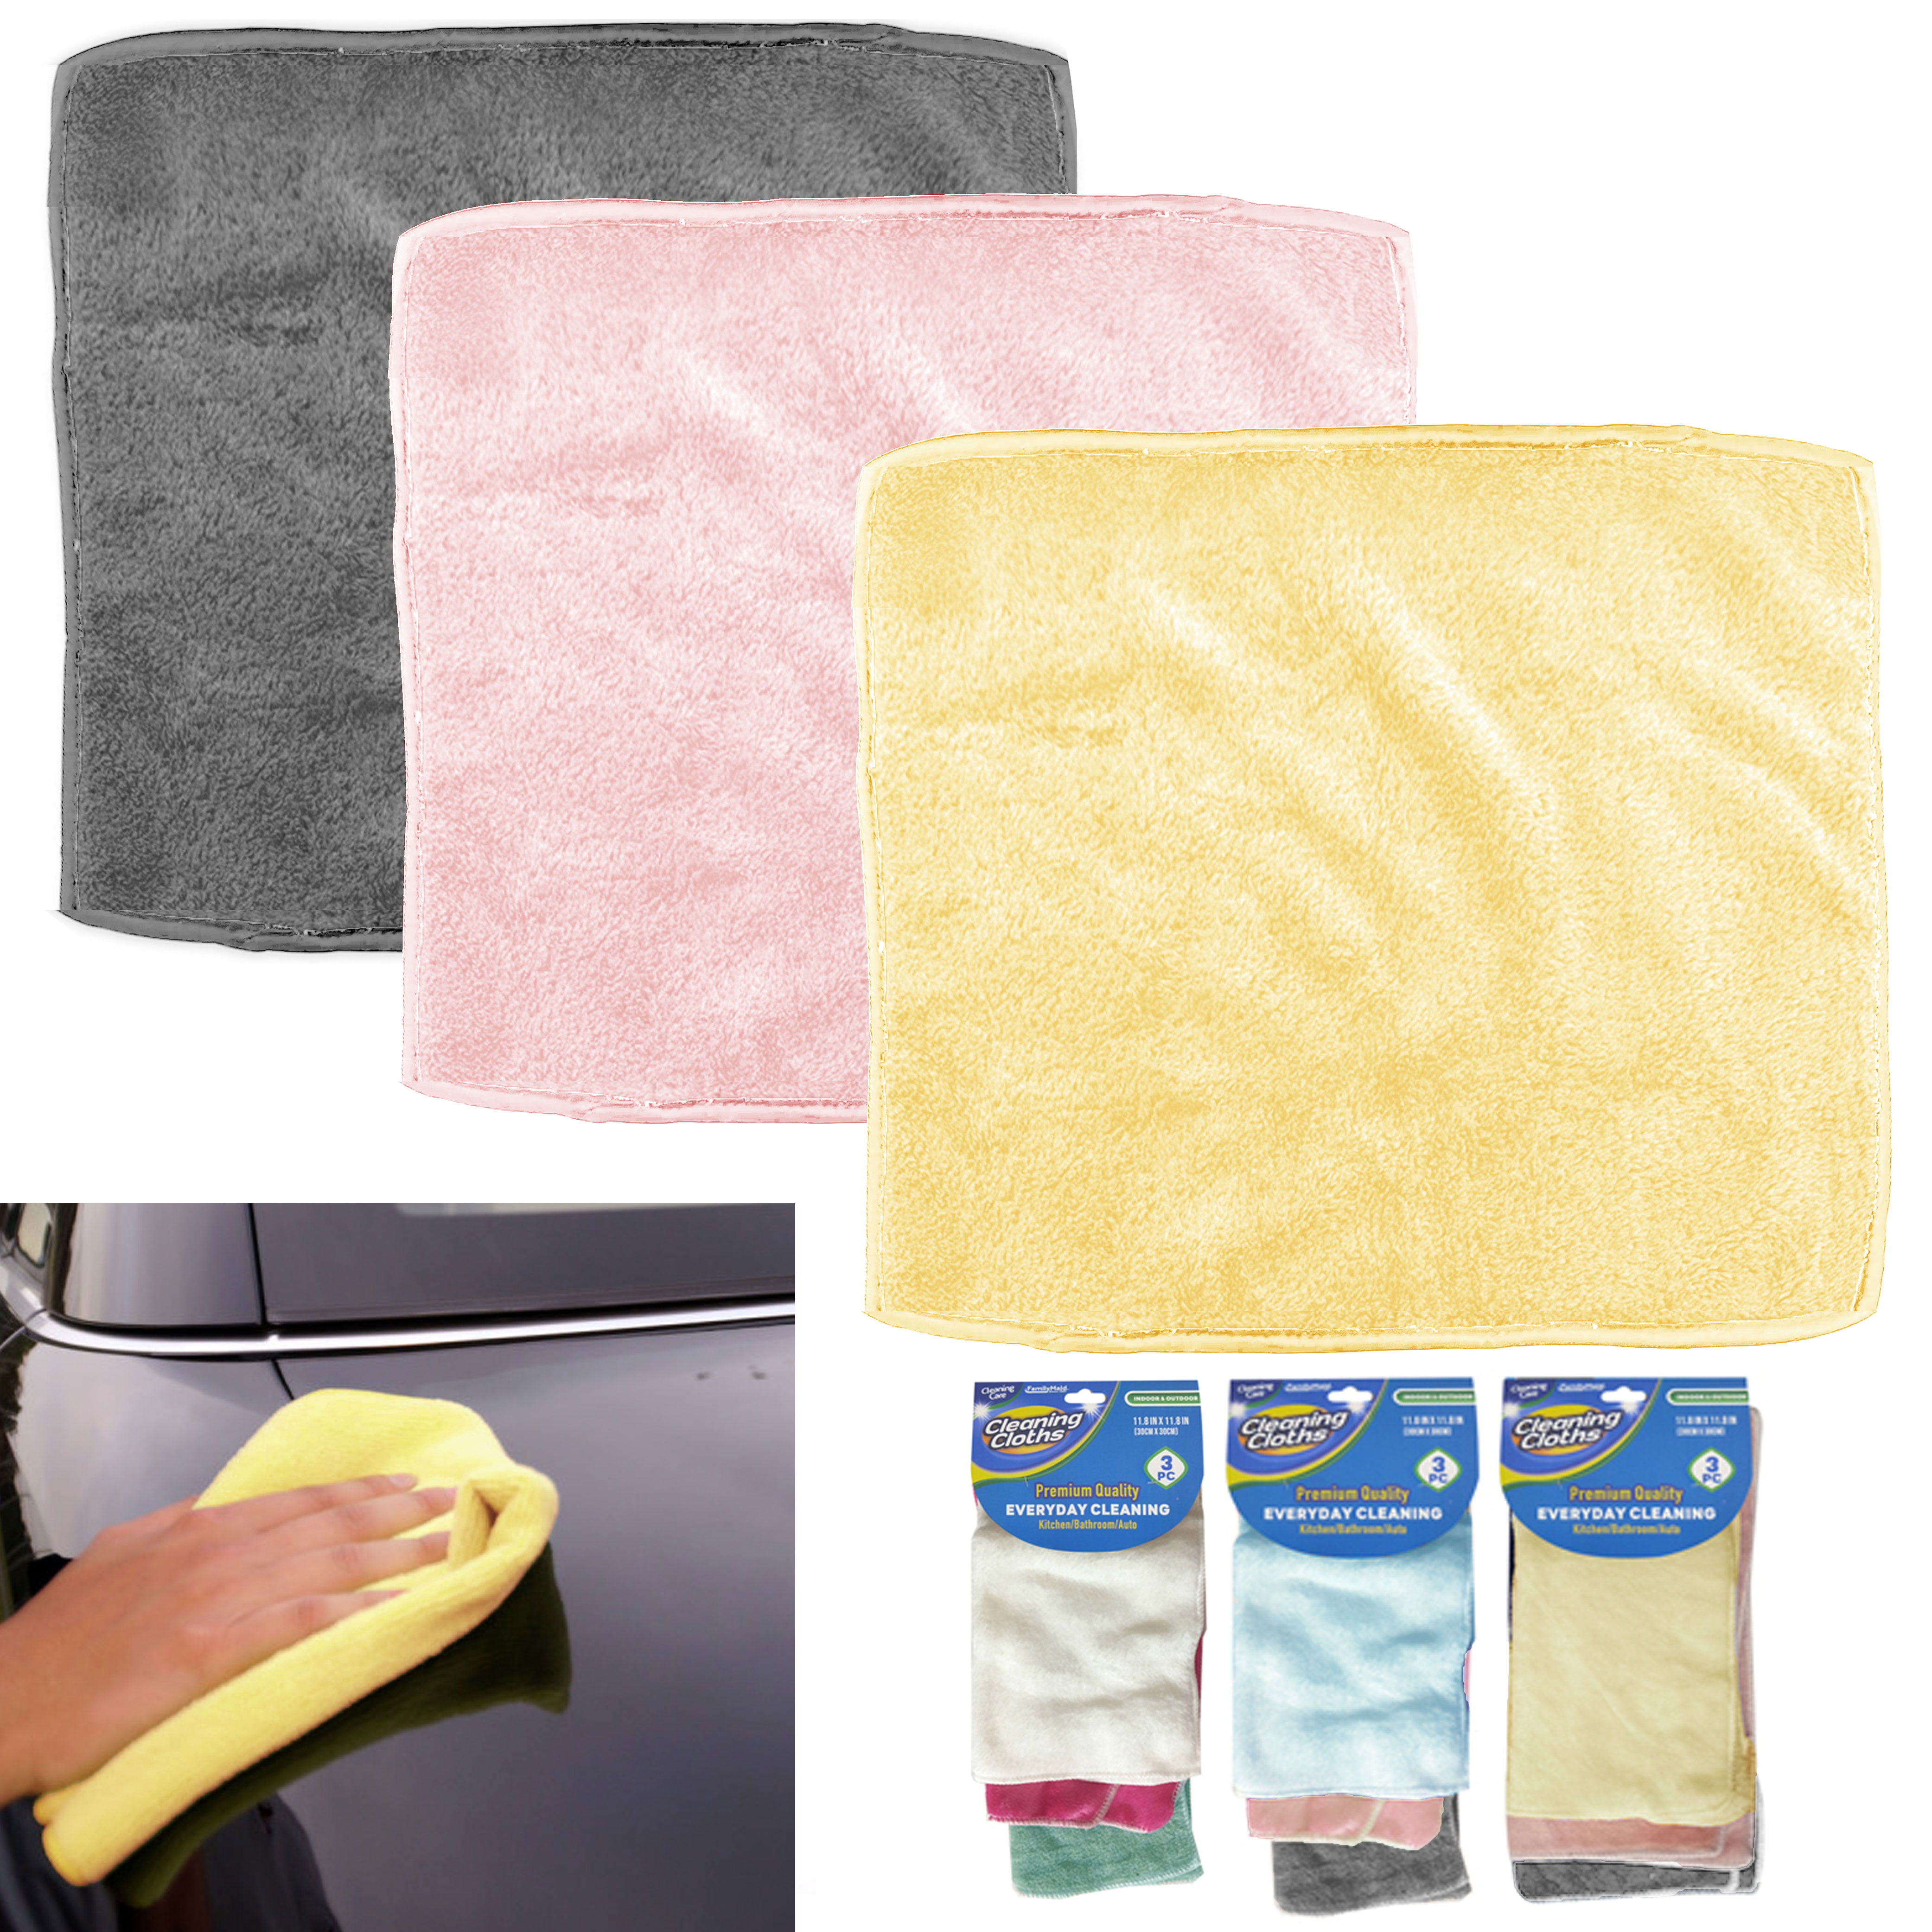 Window Scrubbing and Car Windshield and Polishing Microfiber Towels Home Car Wash Drying Details Cleaning Towel AHCSMRE Microfiber Cleaning Cloths 20 Pieces 1115 inch 